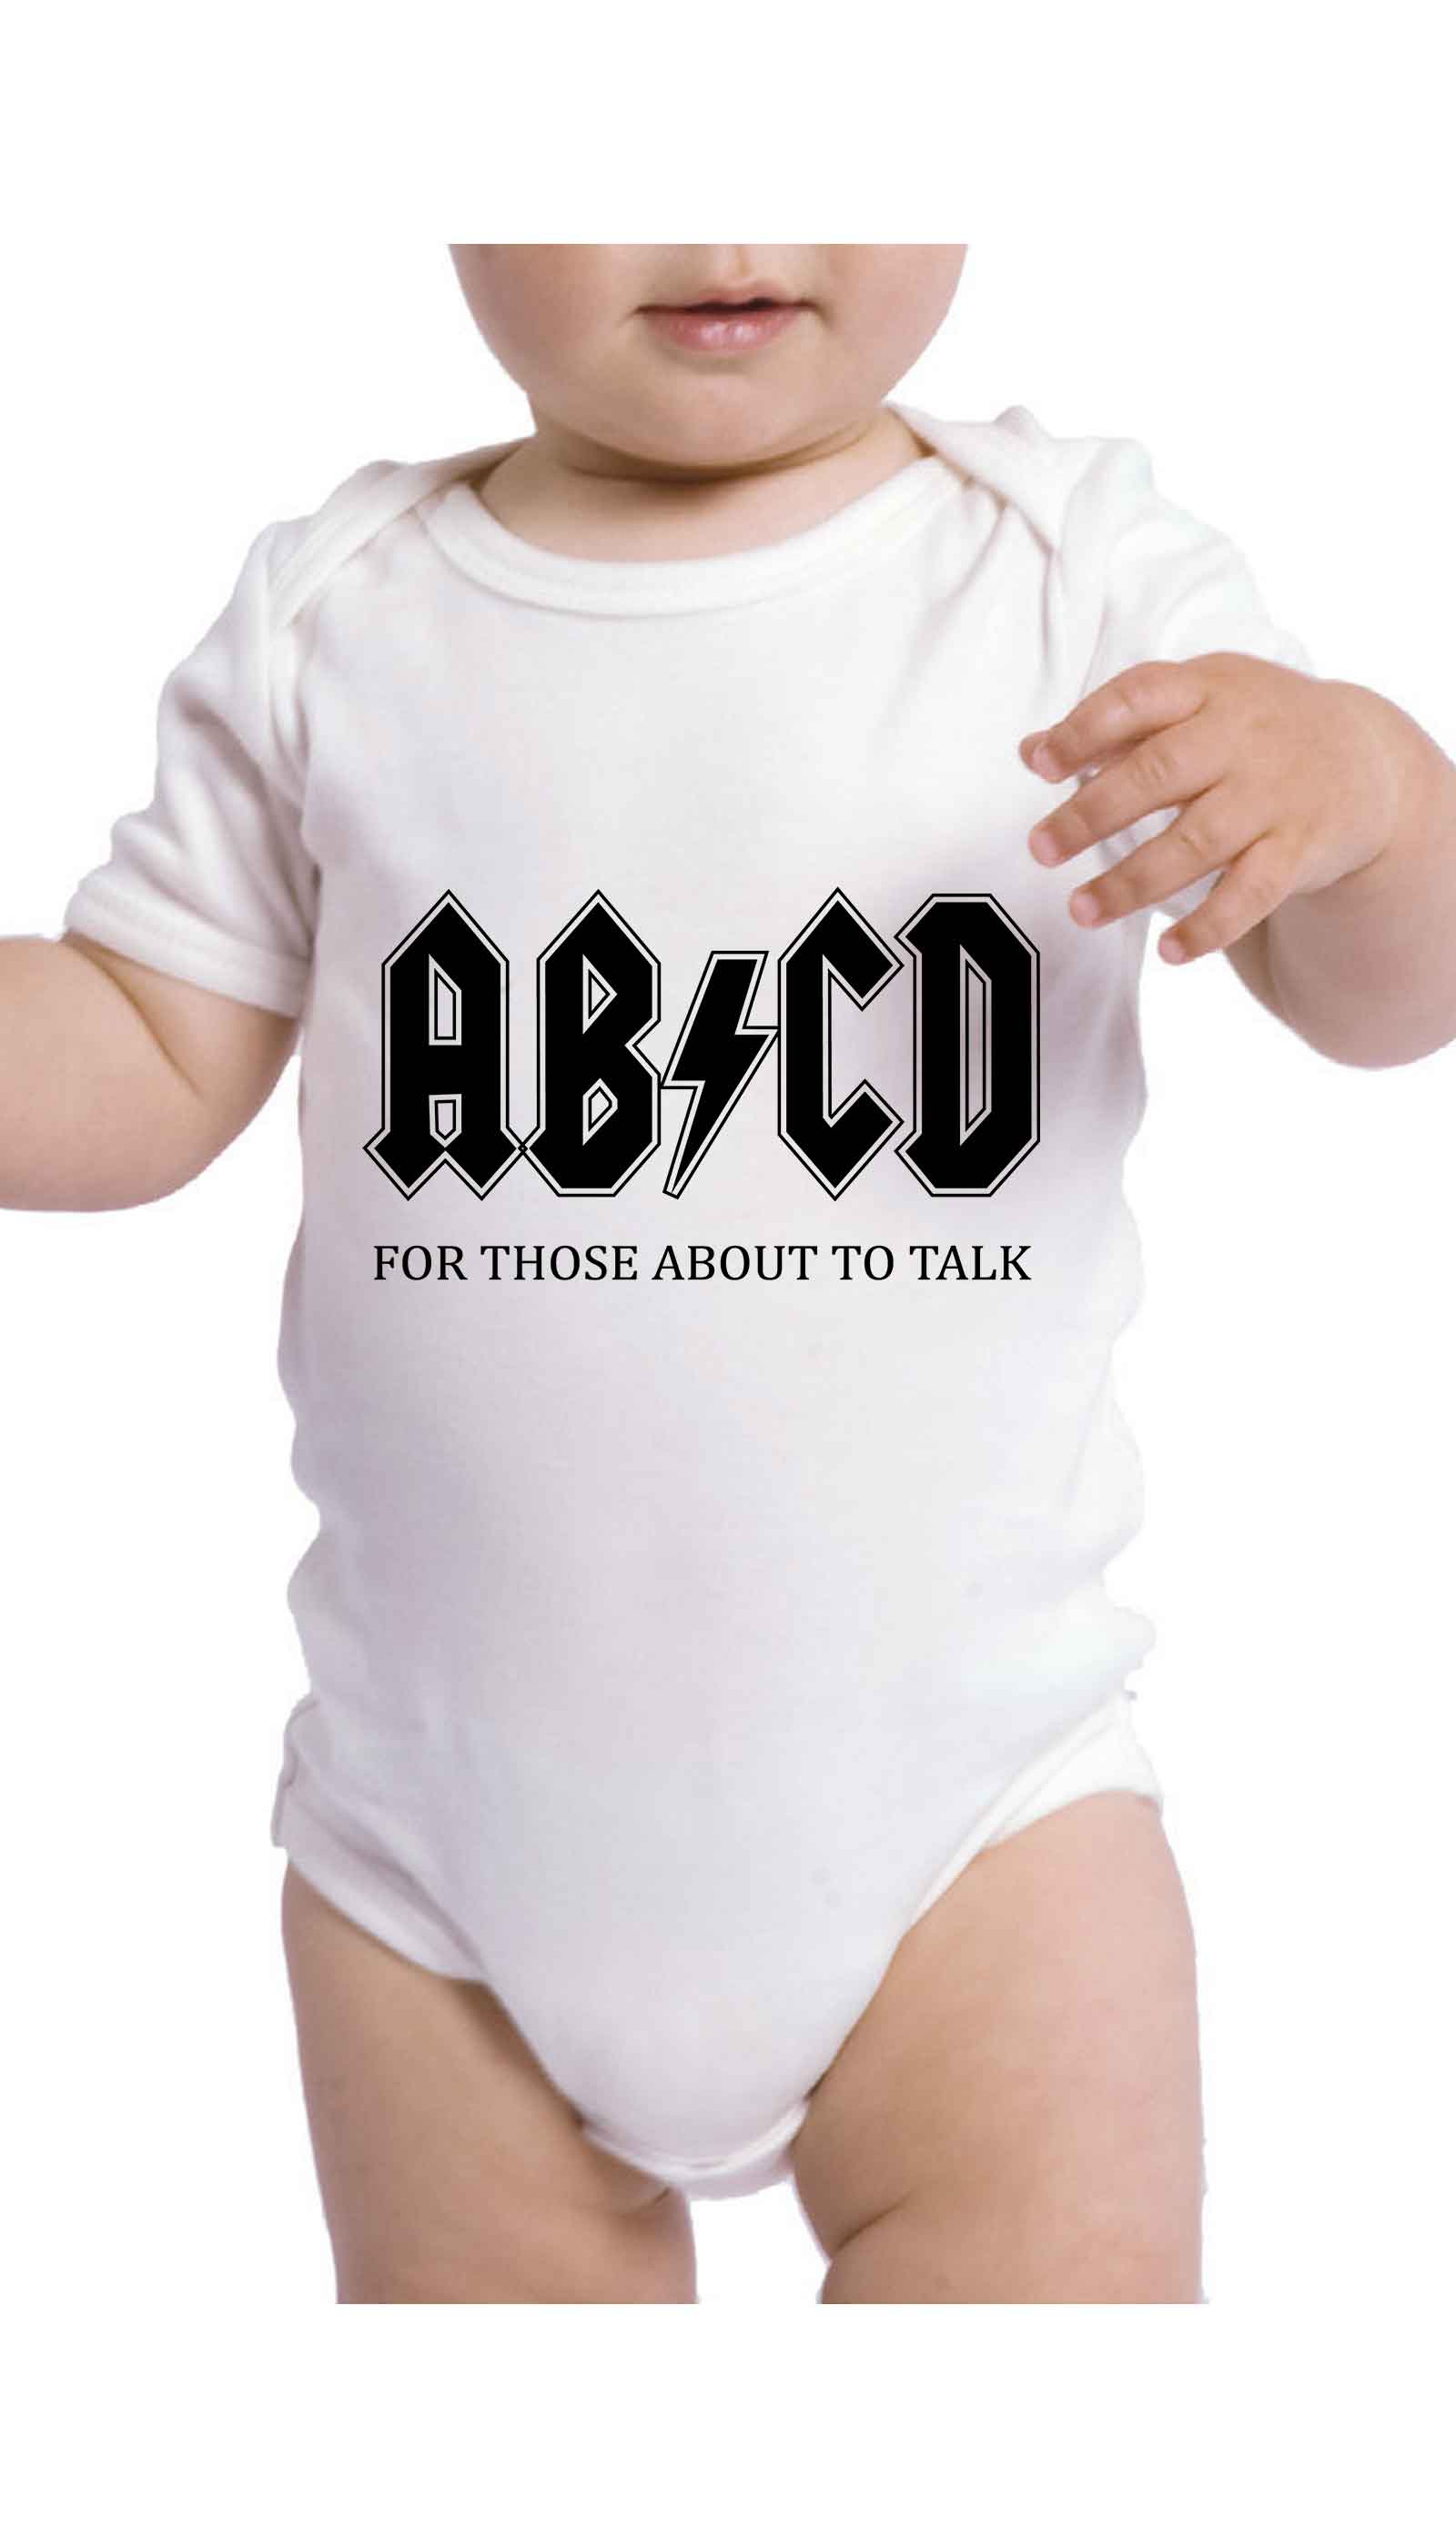 ABCD Funny Baby Infant Onesie